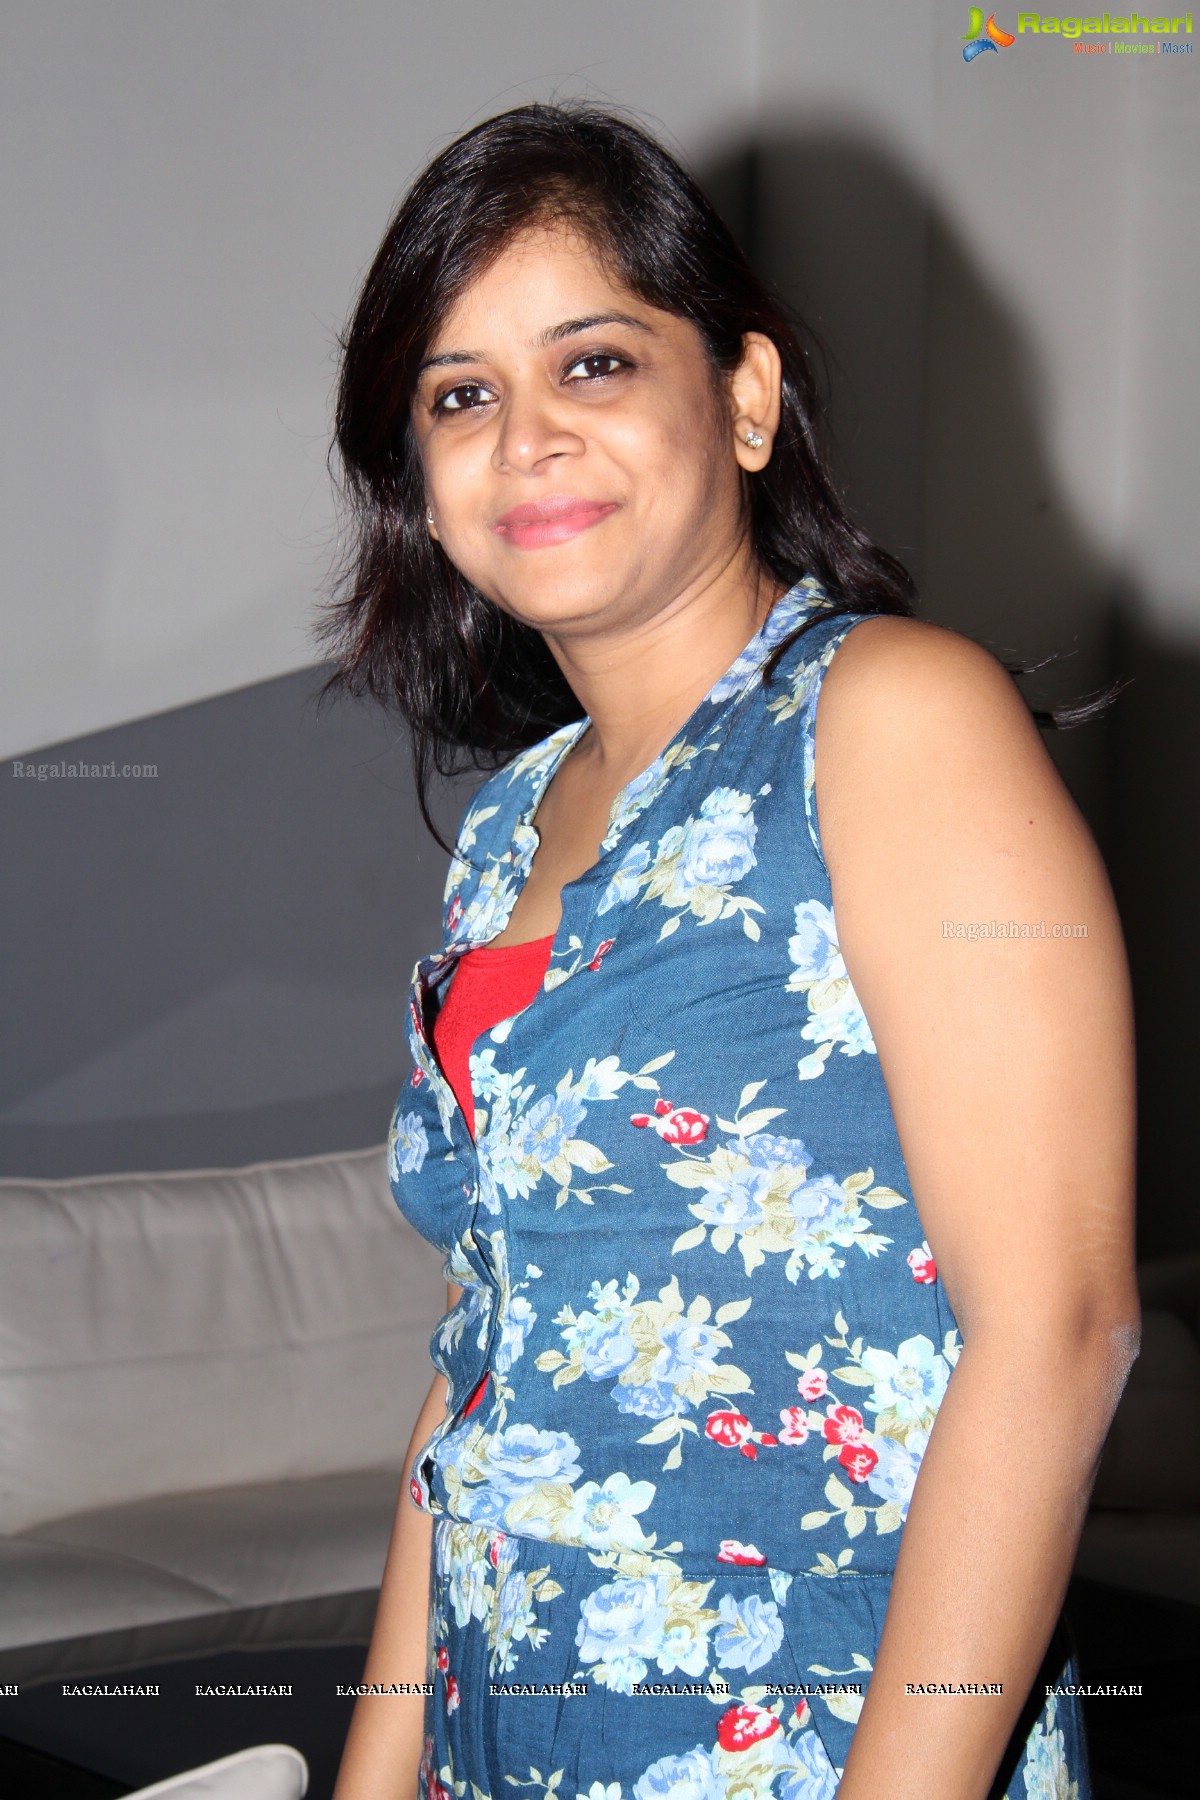 Friendz Forever Party by Simran Solaki at B&C, Hyderabad (Aug. 6, 2014)